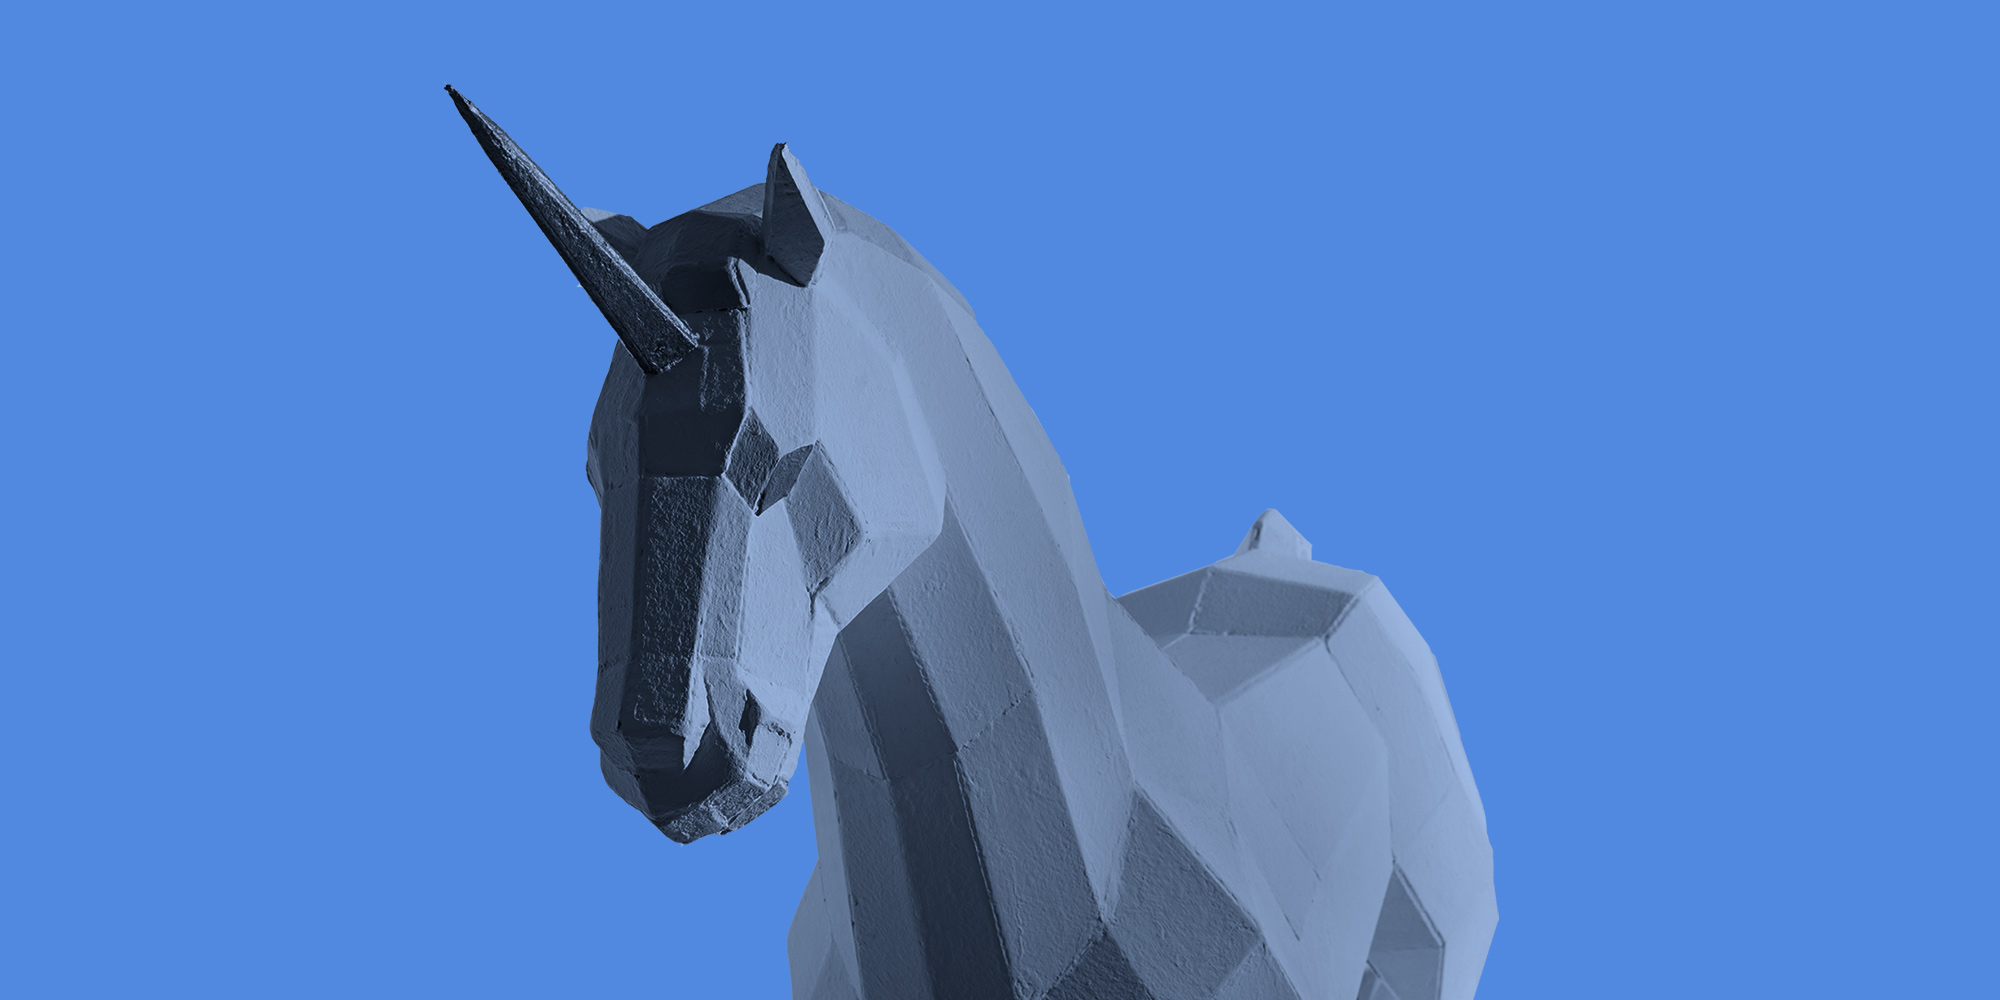 Unicorn made up of geometric planes on a bright blue backdrop. Queering recovery